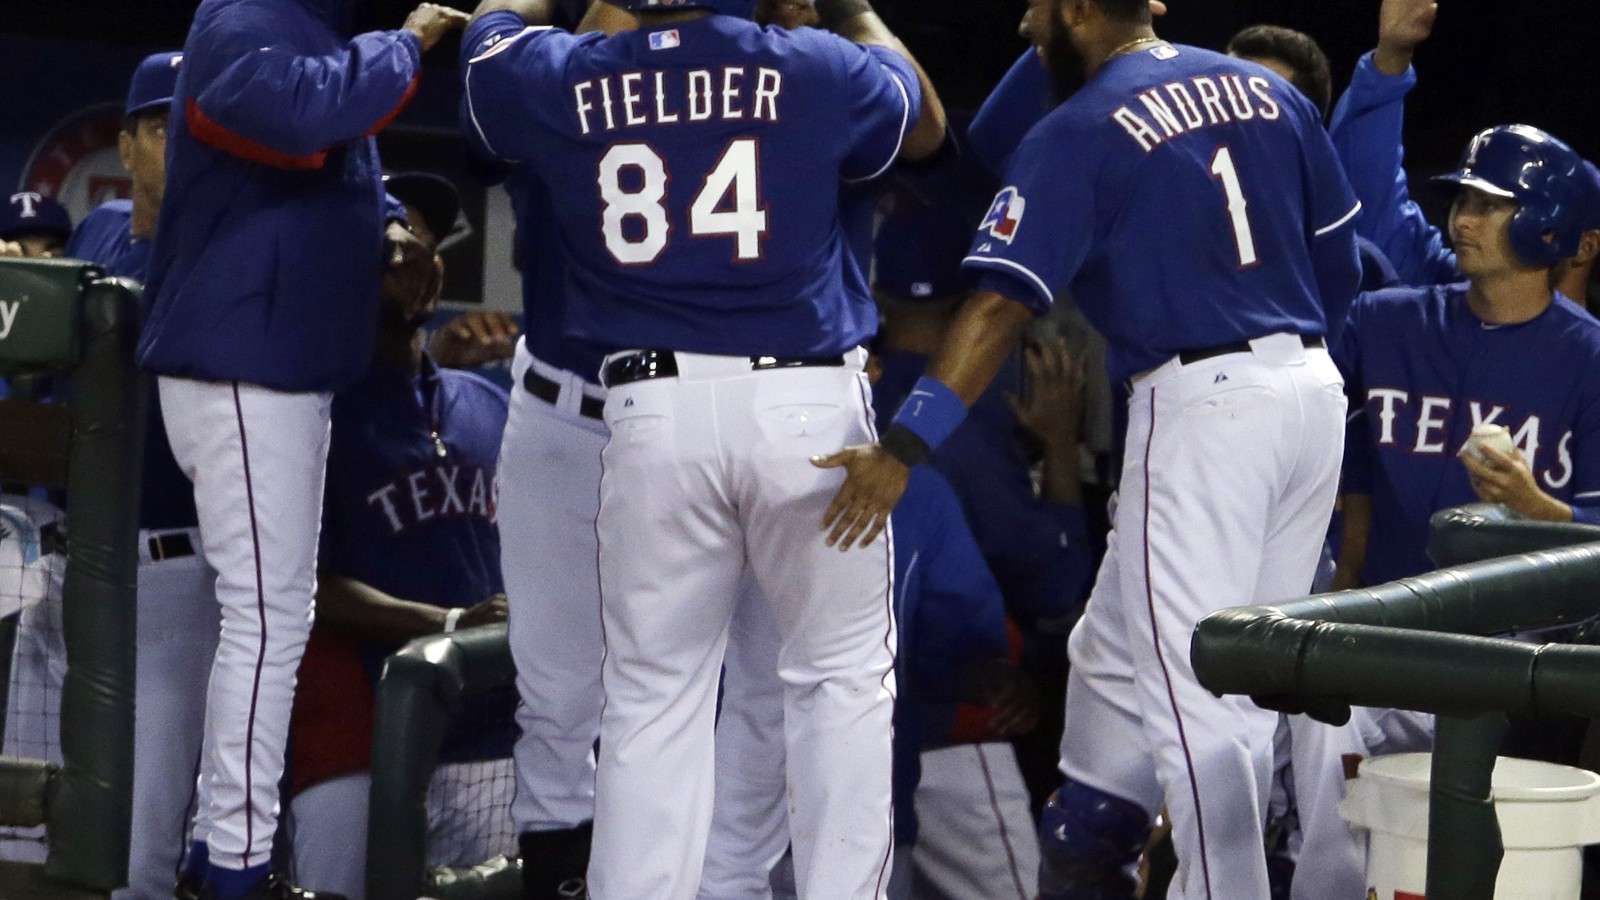 Can Prince Fielder Win a World Series for Detroit? - The Atlantic